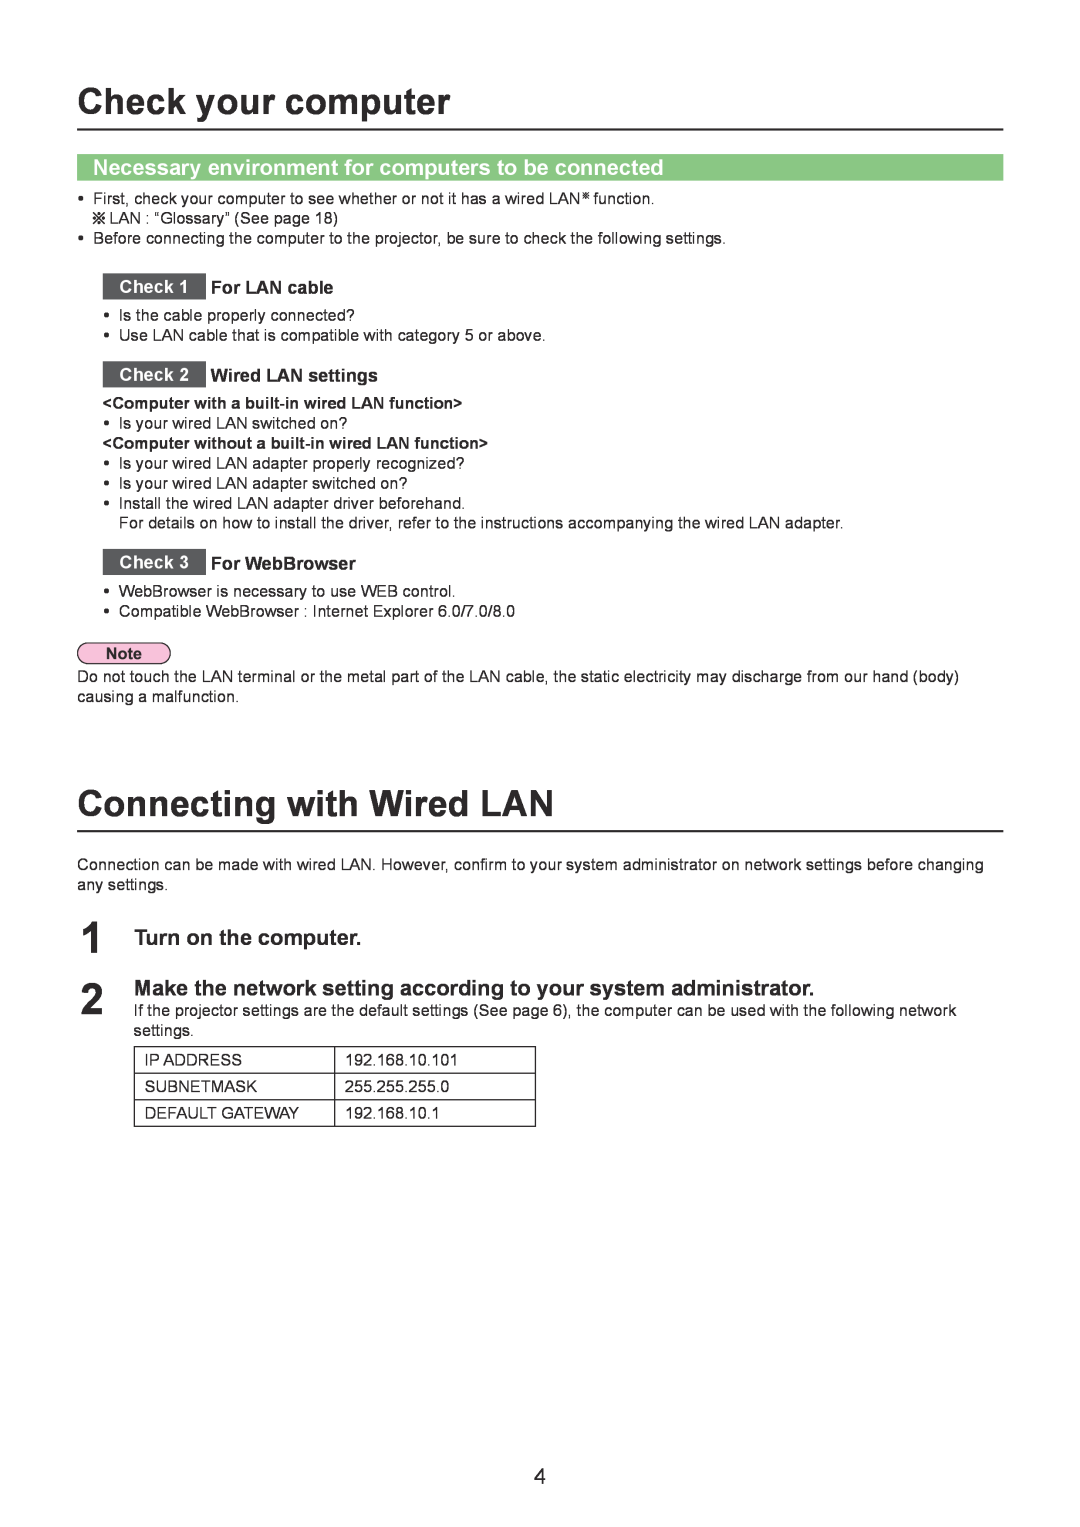 Panasonic LB1EA, LB1U Check your computer, Connecting with Wired LAN, Necessary environment for computers to be connected 